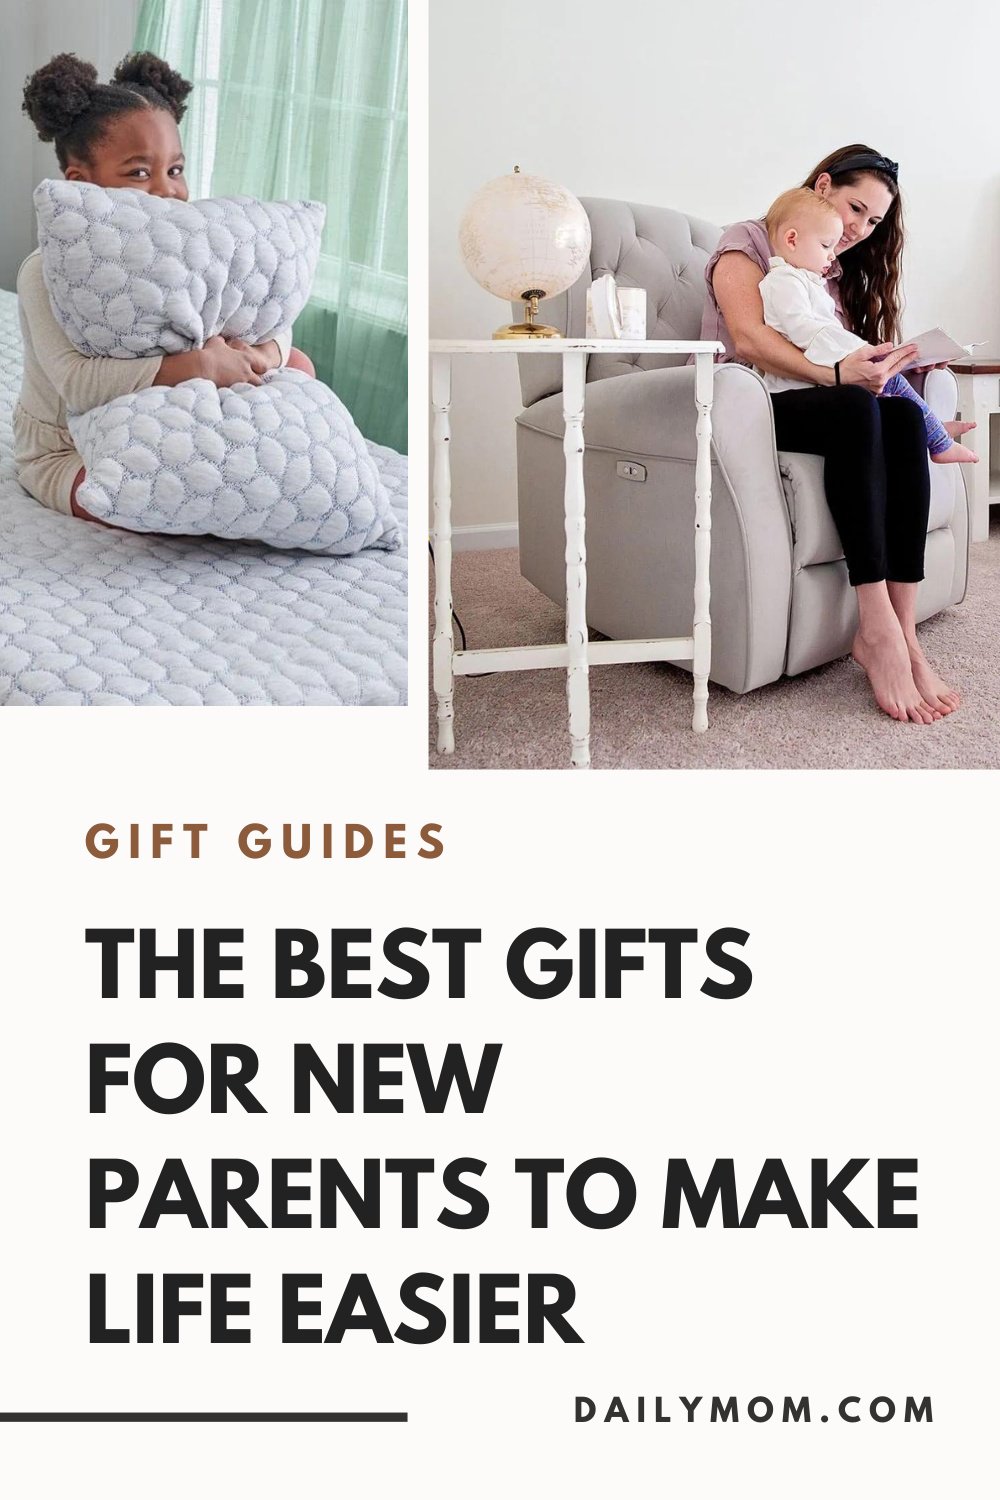 22 Of The Best Gifts For New Parents To Make Life Easier 80 Daily Mom, Magazine For Families